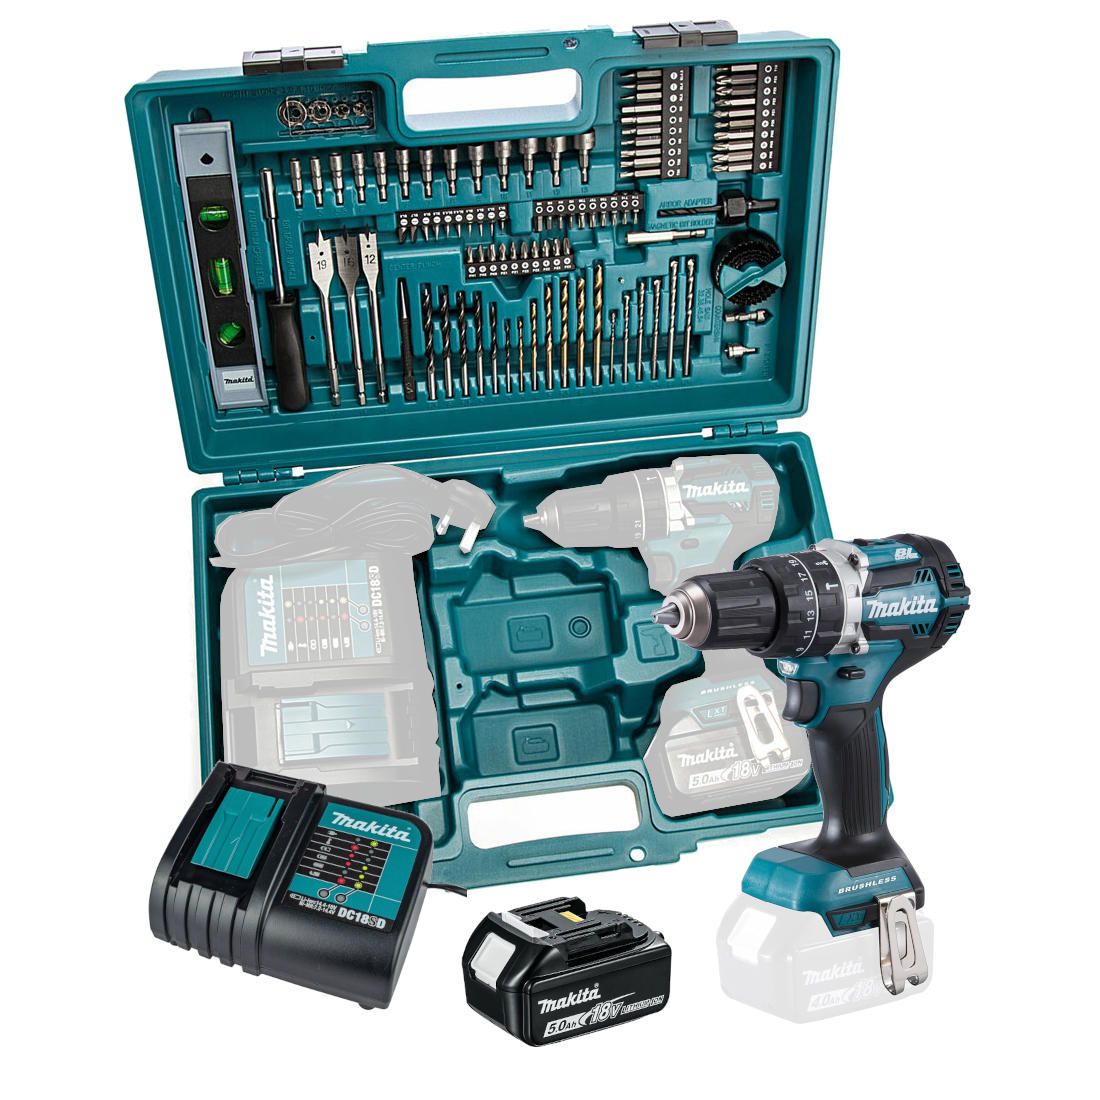 Charger & Case Makita DHP484 18v Brushless Combi Drill with 1 x 5Ah Battery 